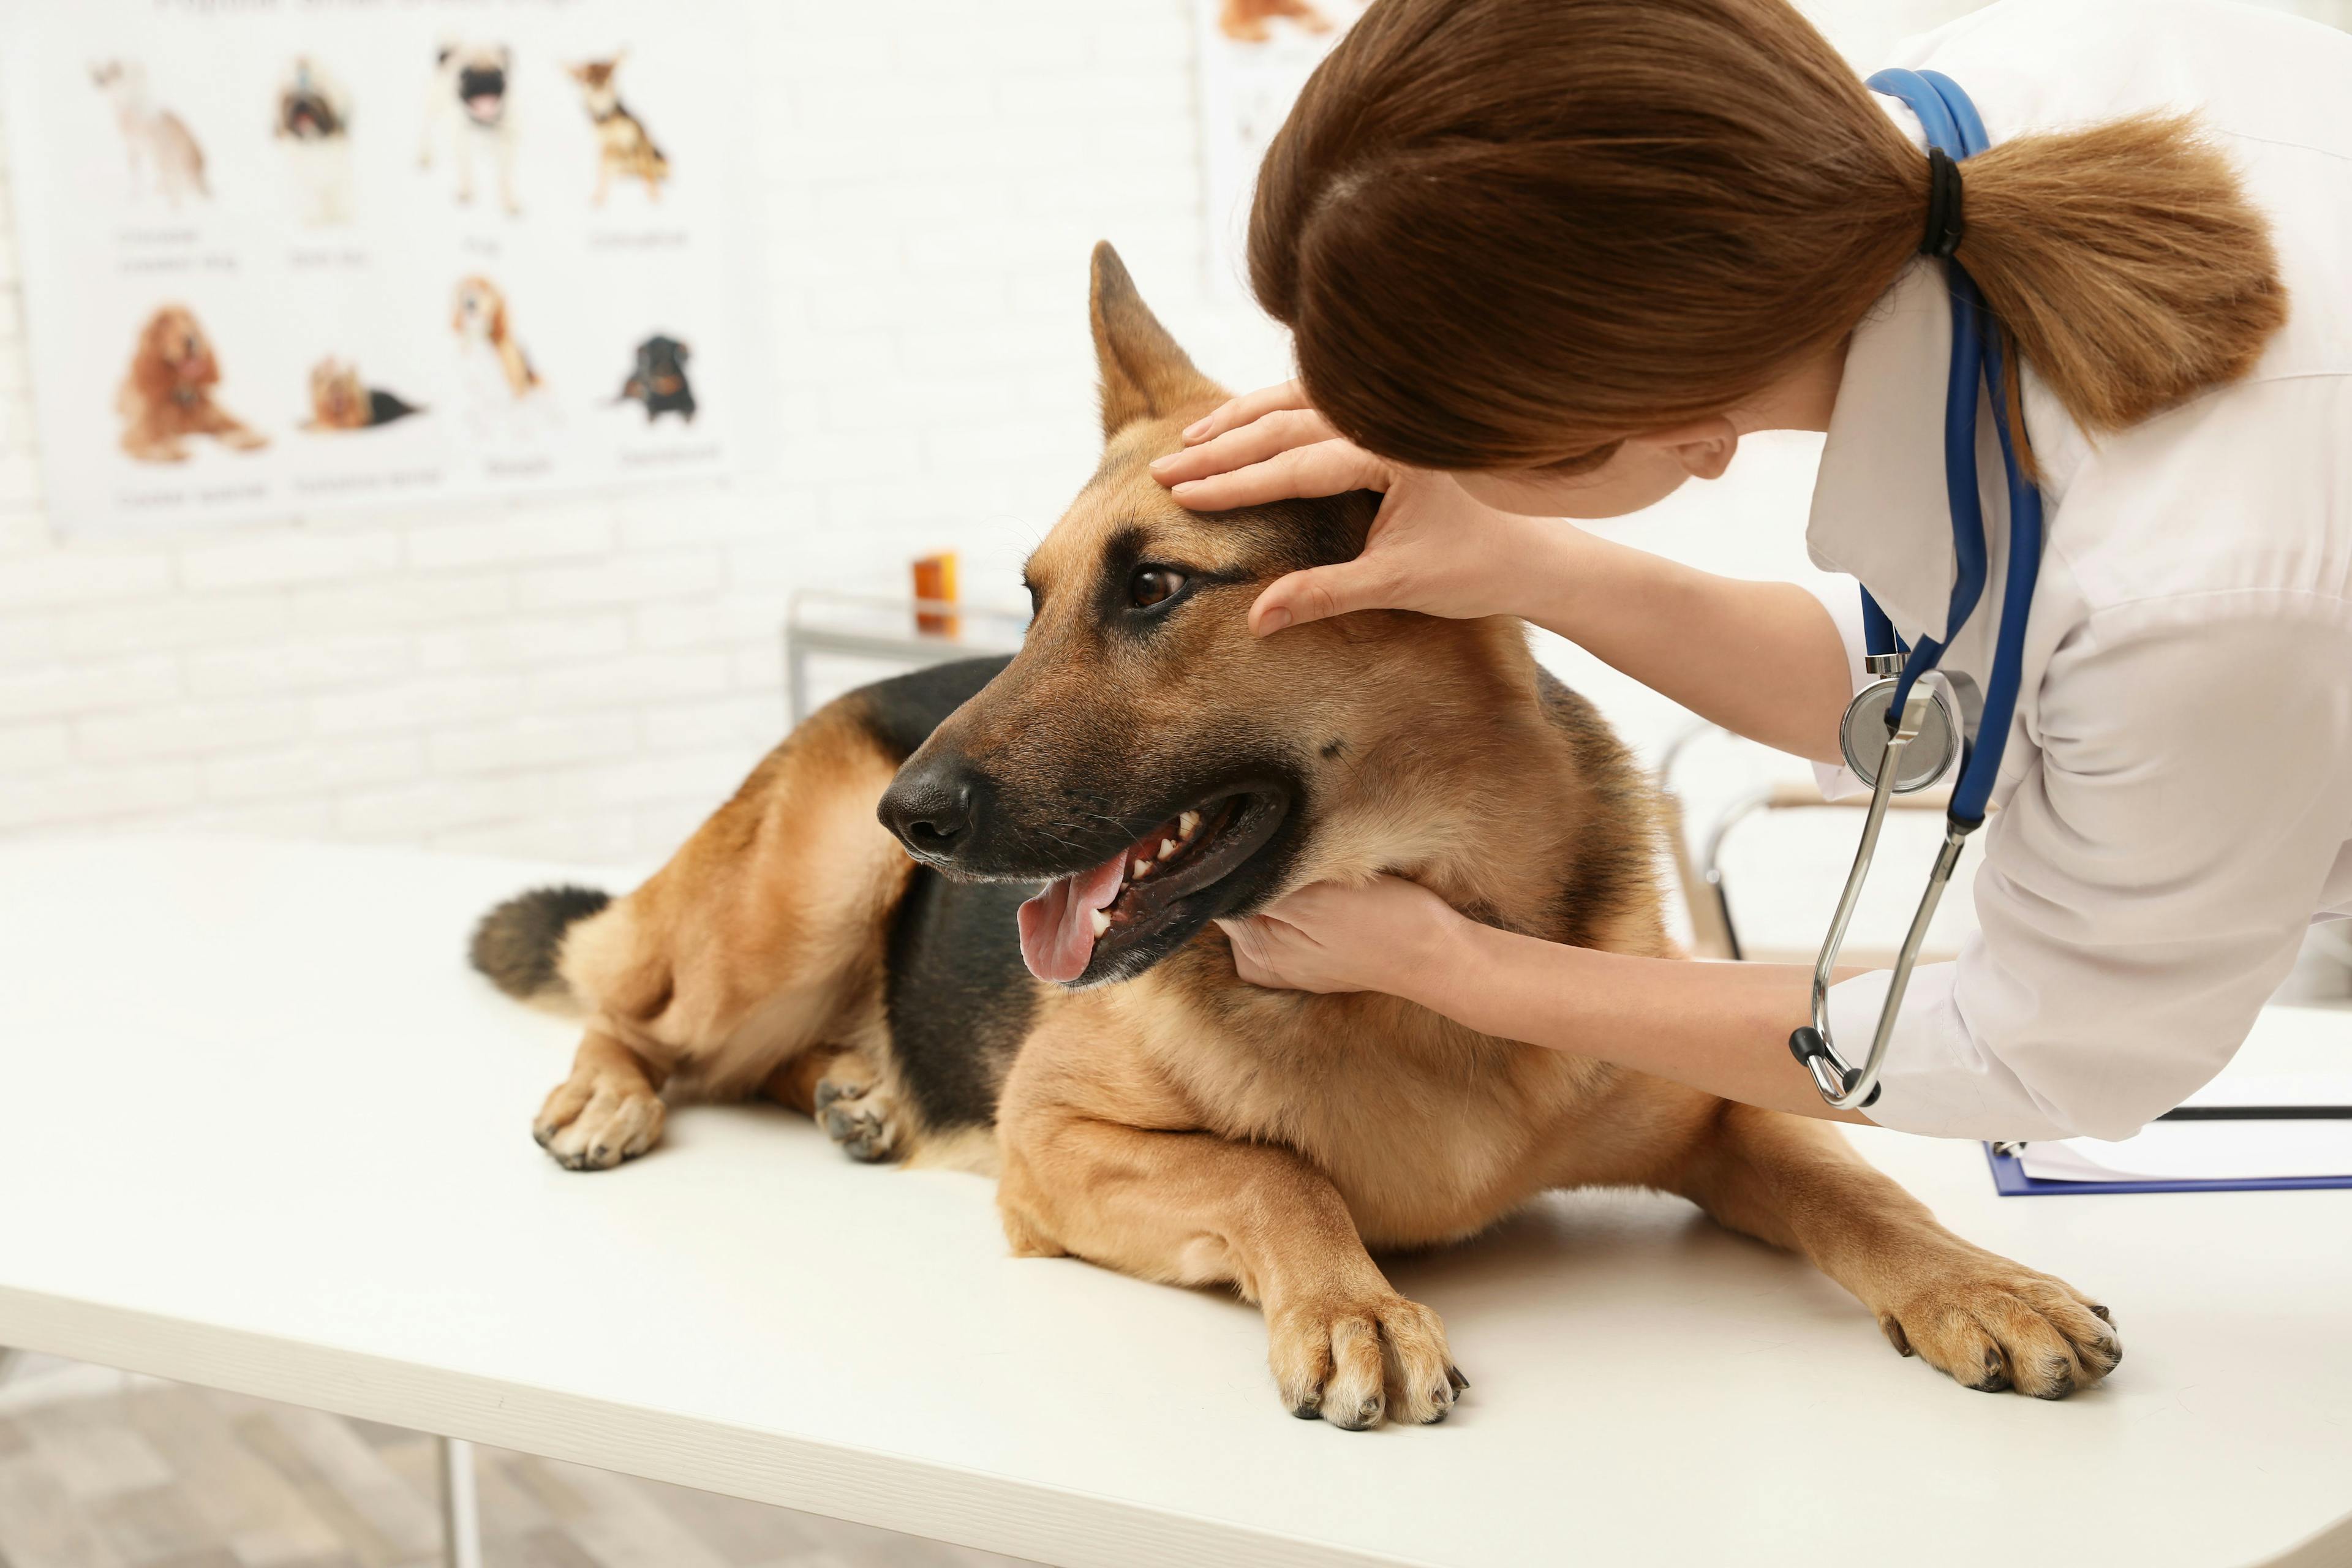 Photo: New Africa/Adobe Stock

A veterinarian examines a dog's eyes during a clinic visit.